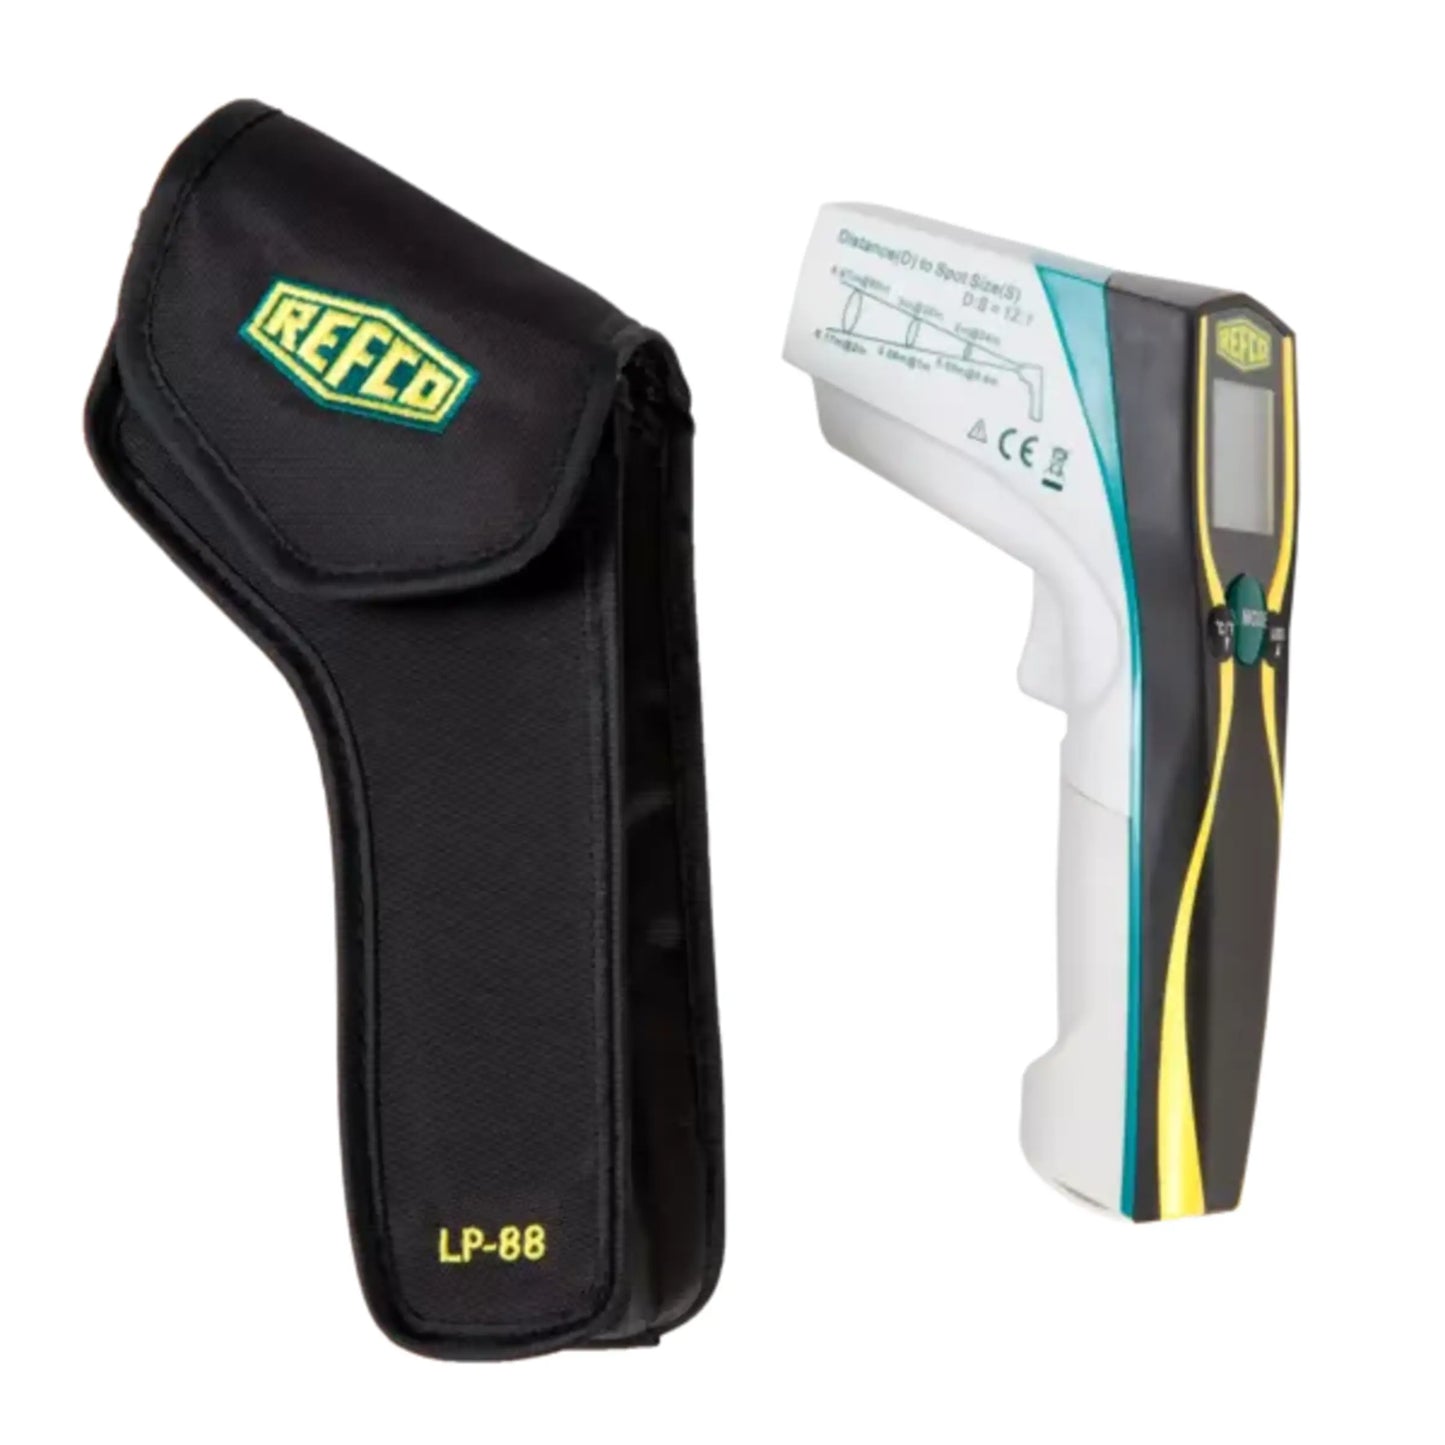 Refco LP-88 Infrared Thermometer